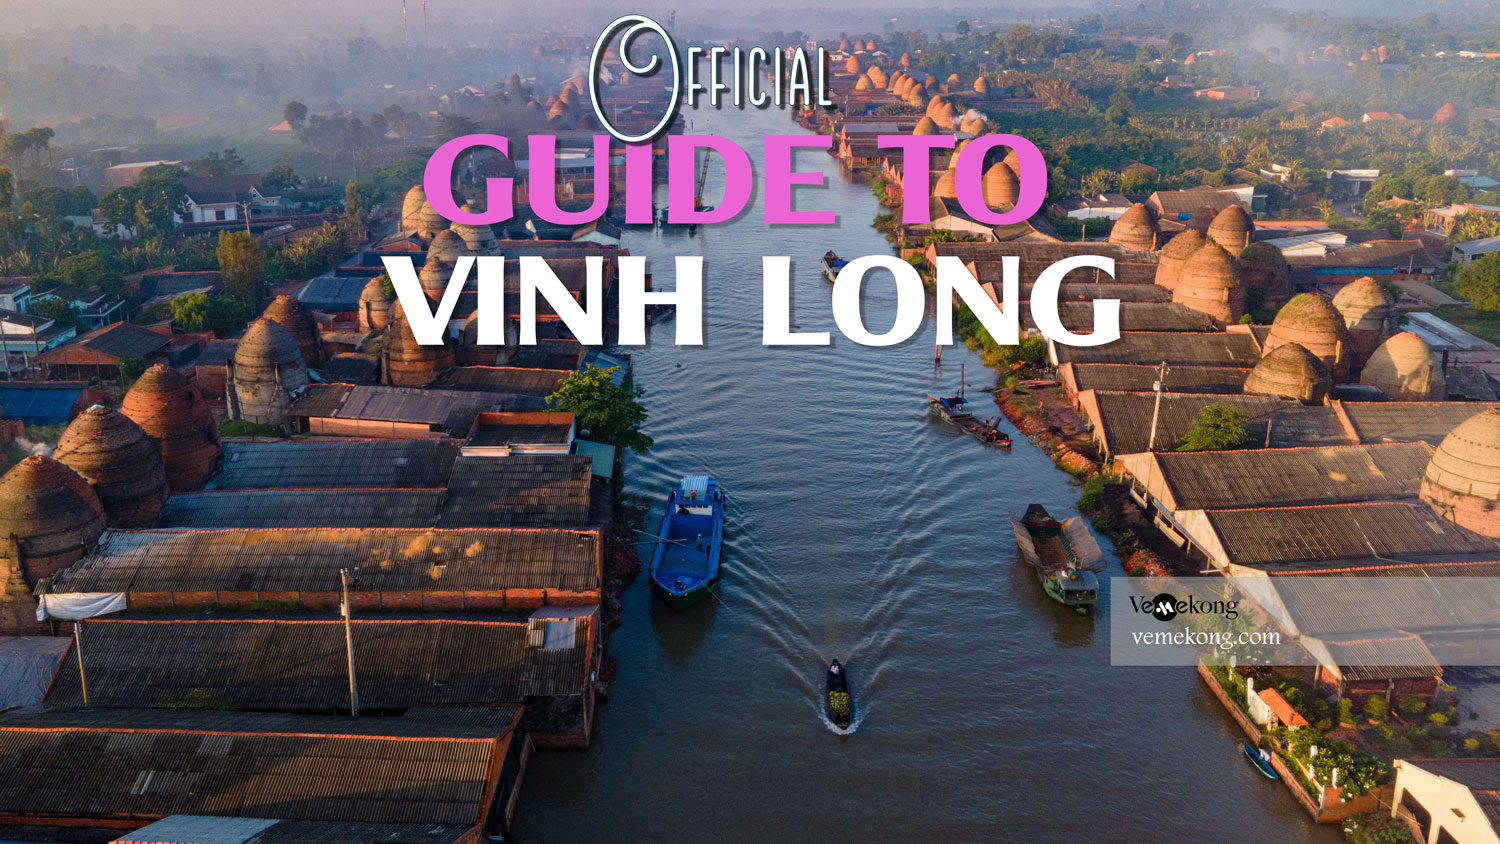 Van Thanh Mieu Temple – What to Do in Vinh Long